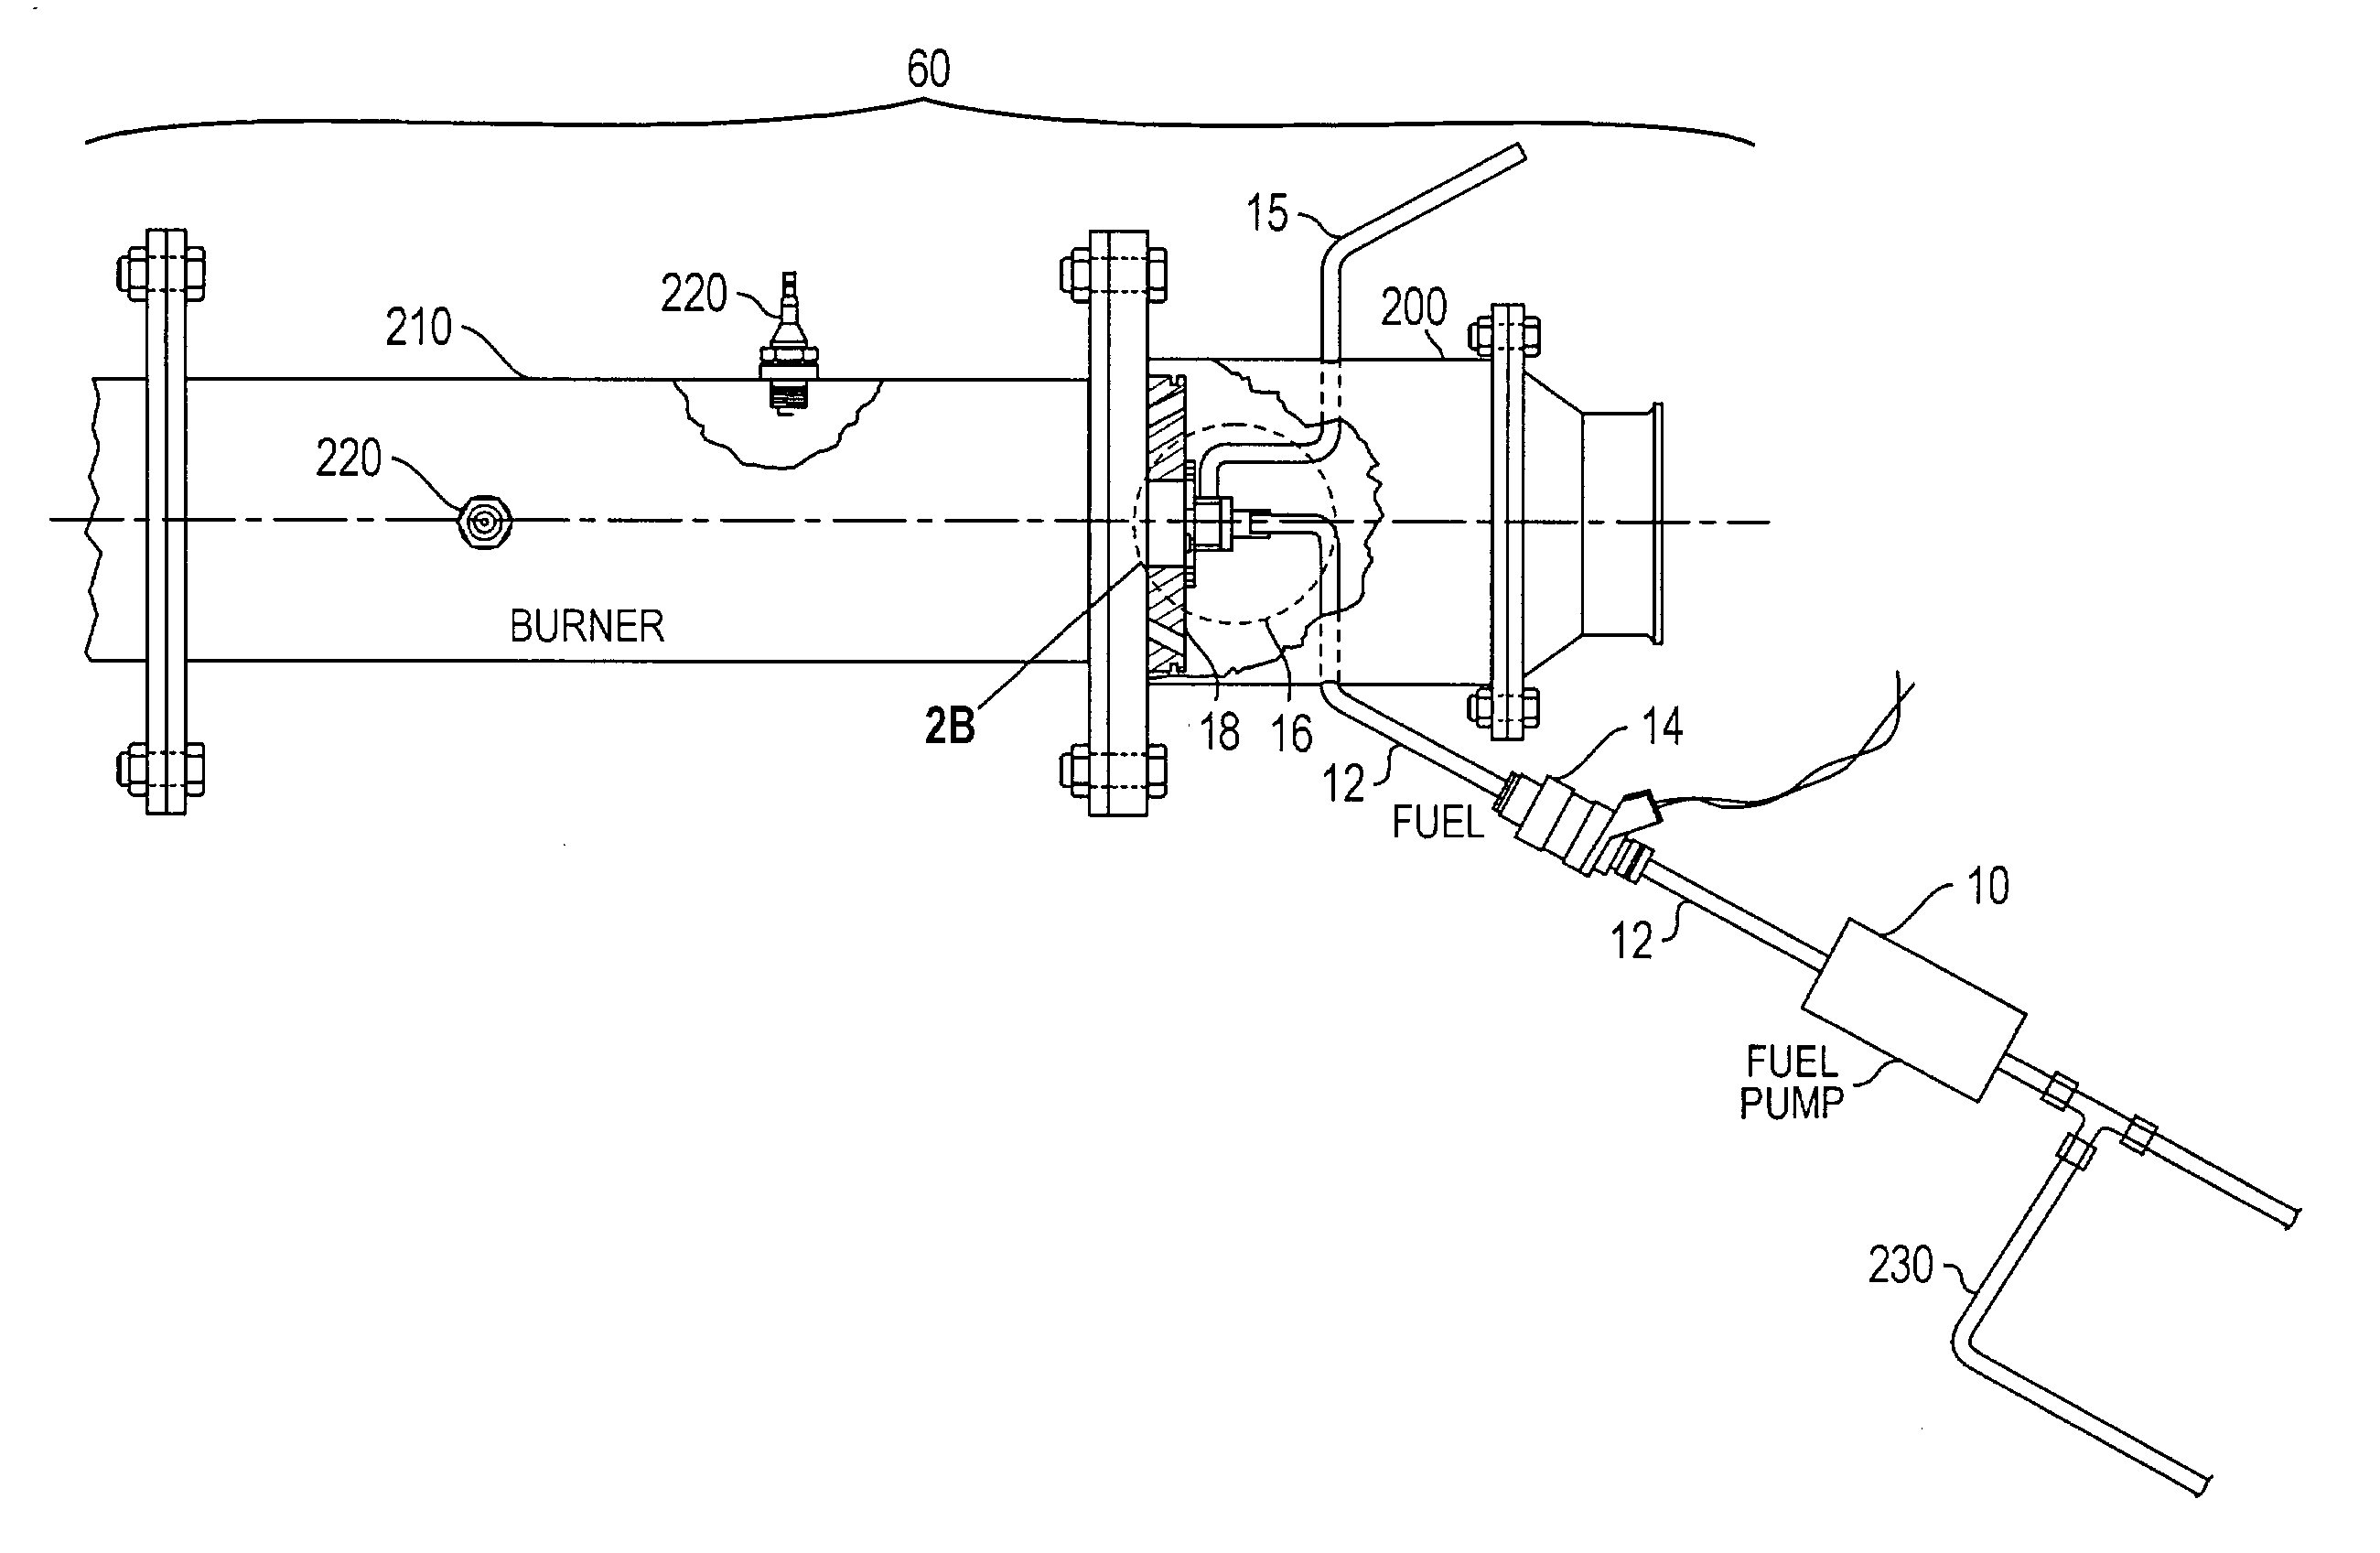 Method for accelerated aging of catalytic converters incorporating engine cold start simulation